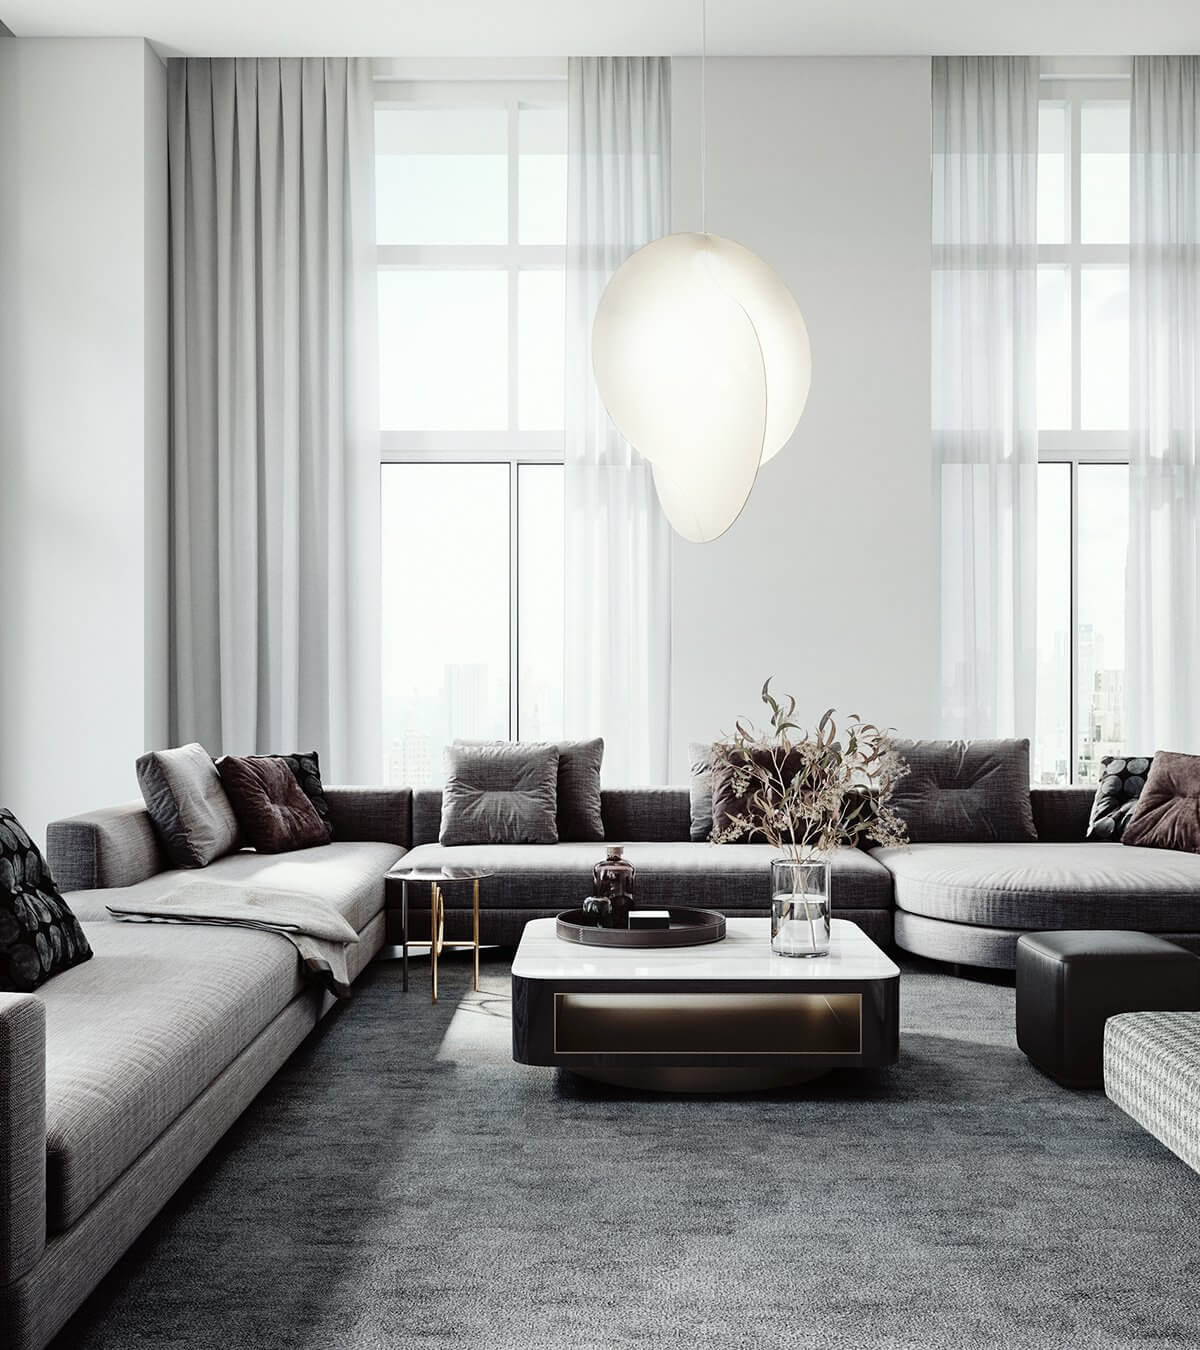 Furniture couch living room - cgi visualization 2